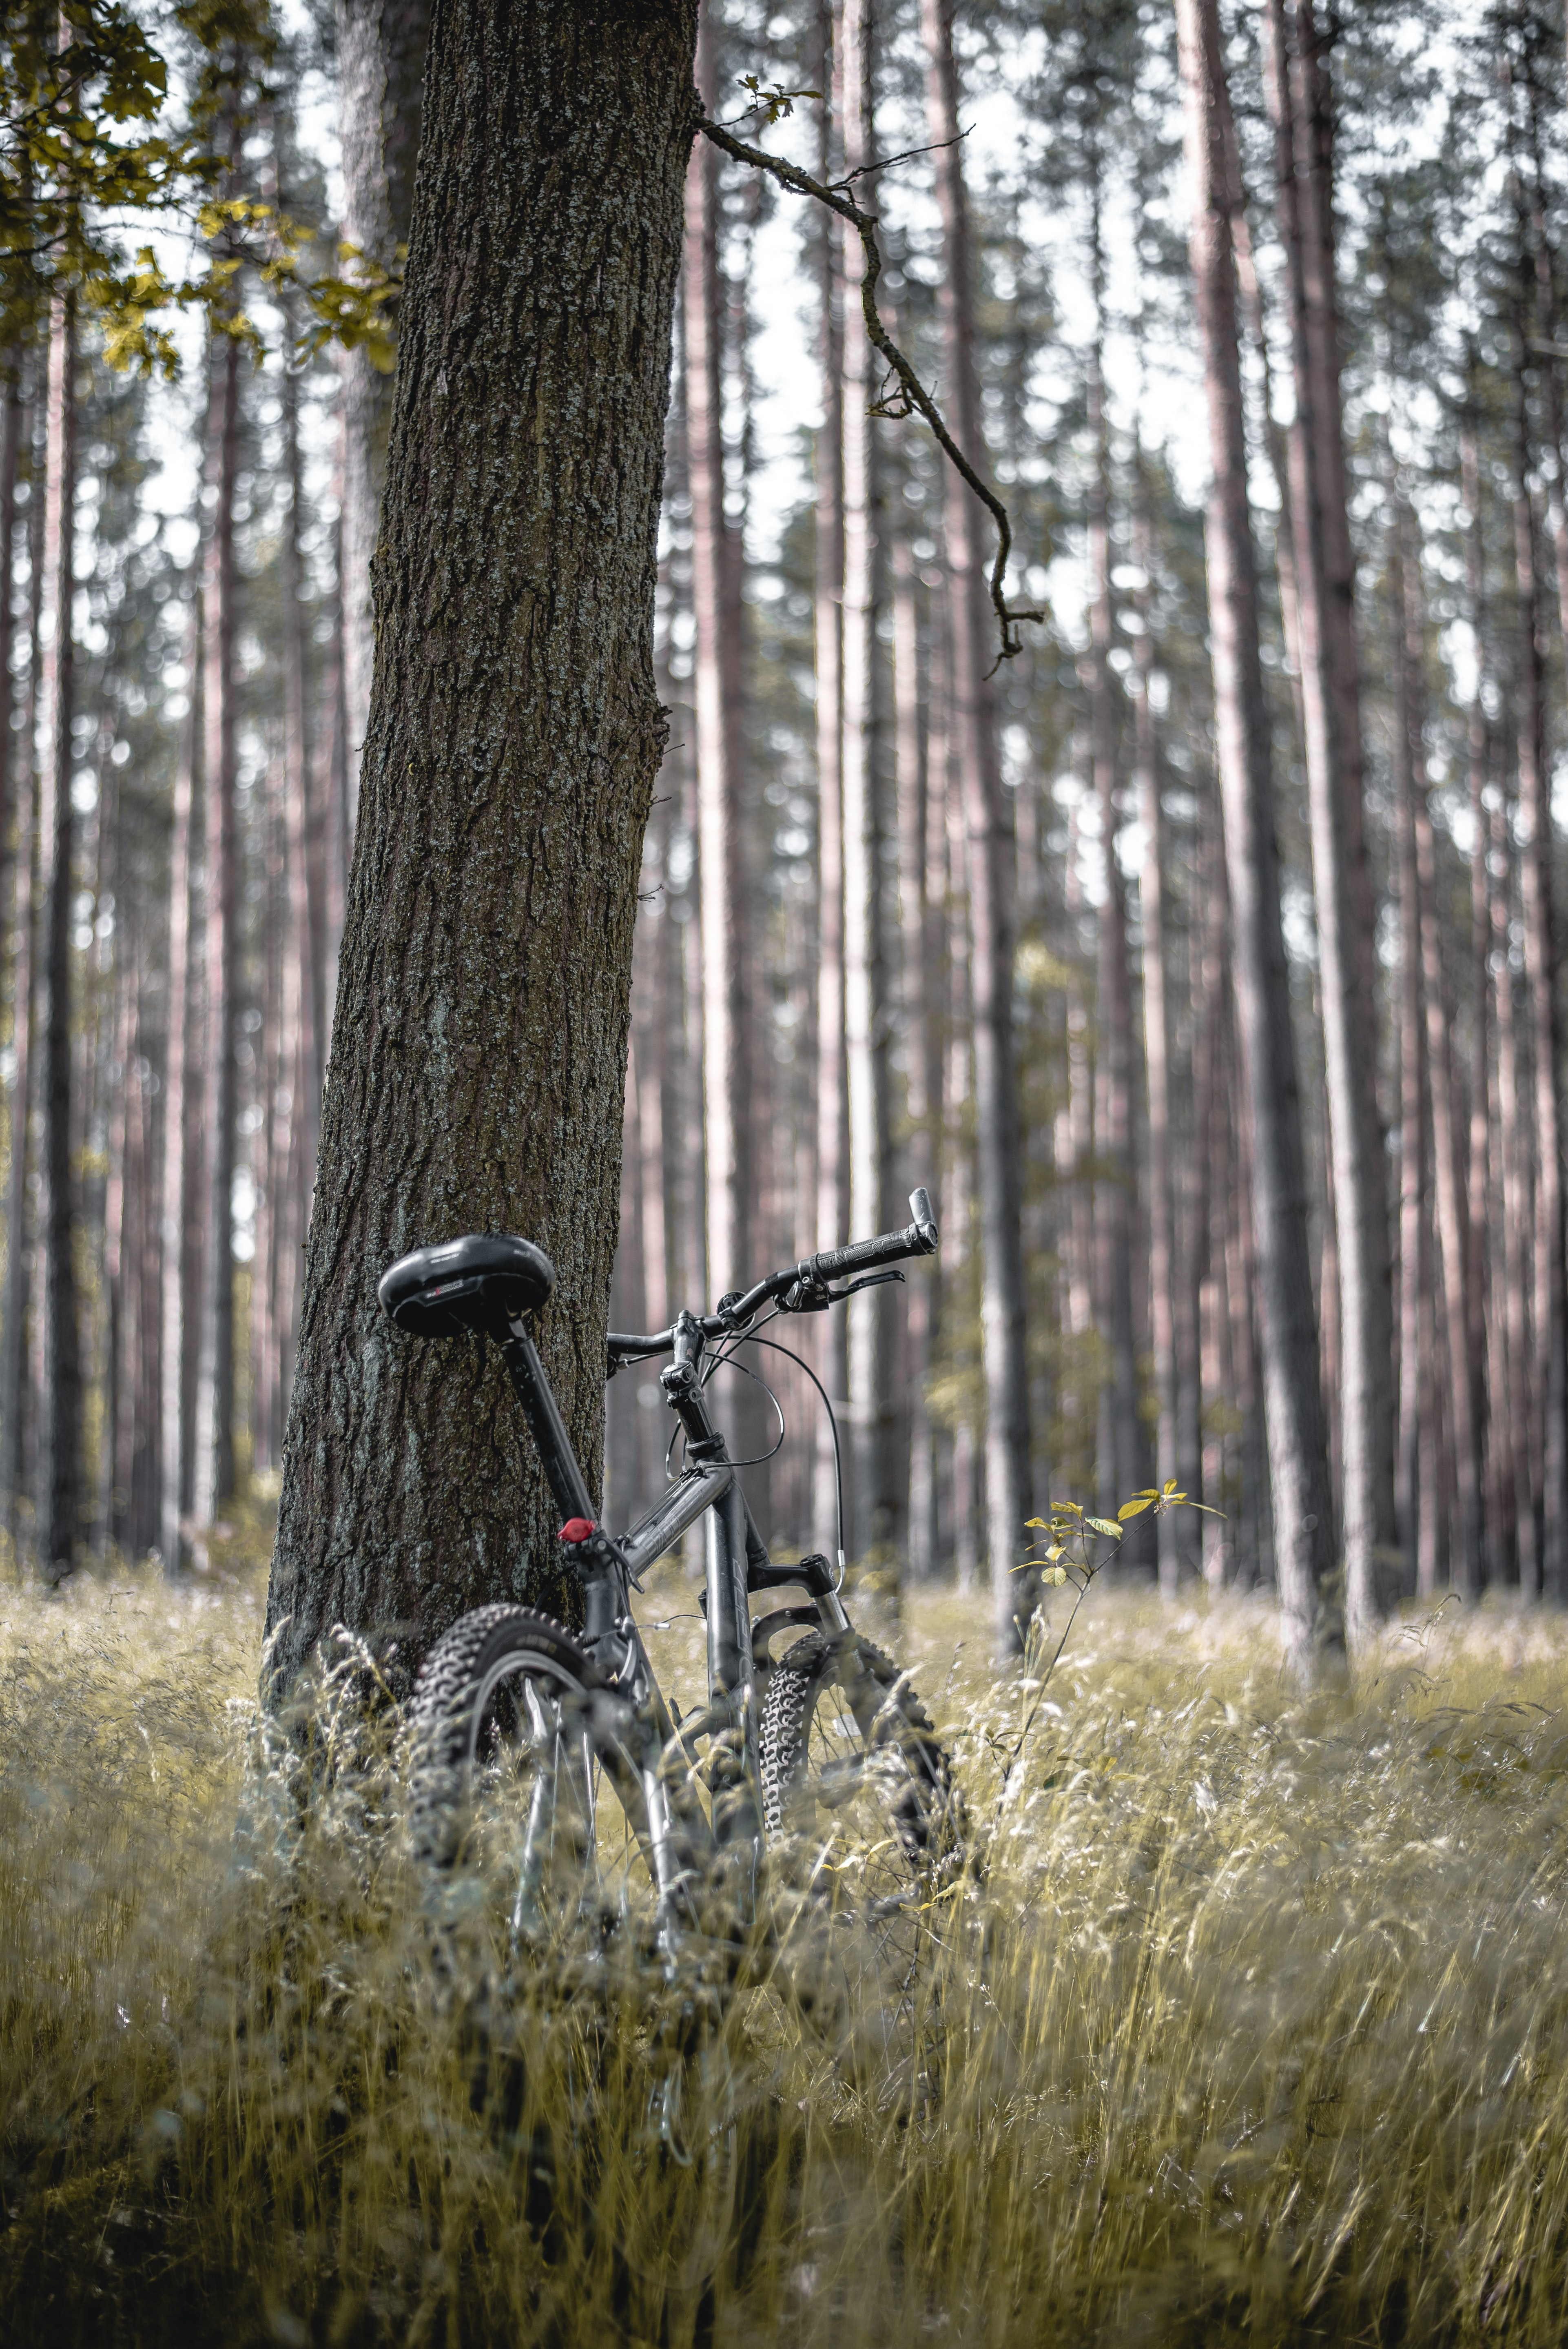 miscellaneous, trees, miscellanea, forest, stroll, bicycle 32K